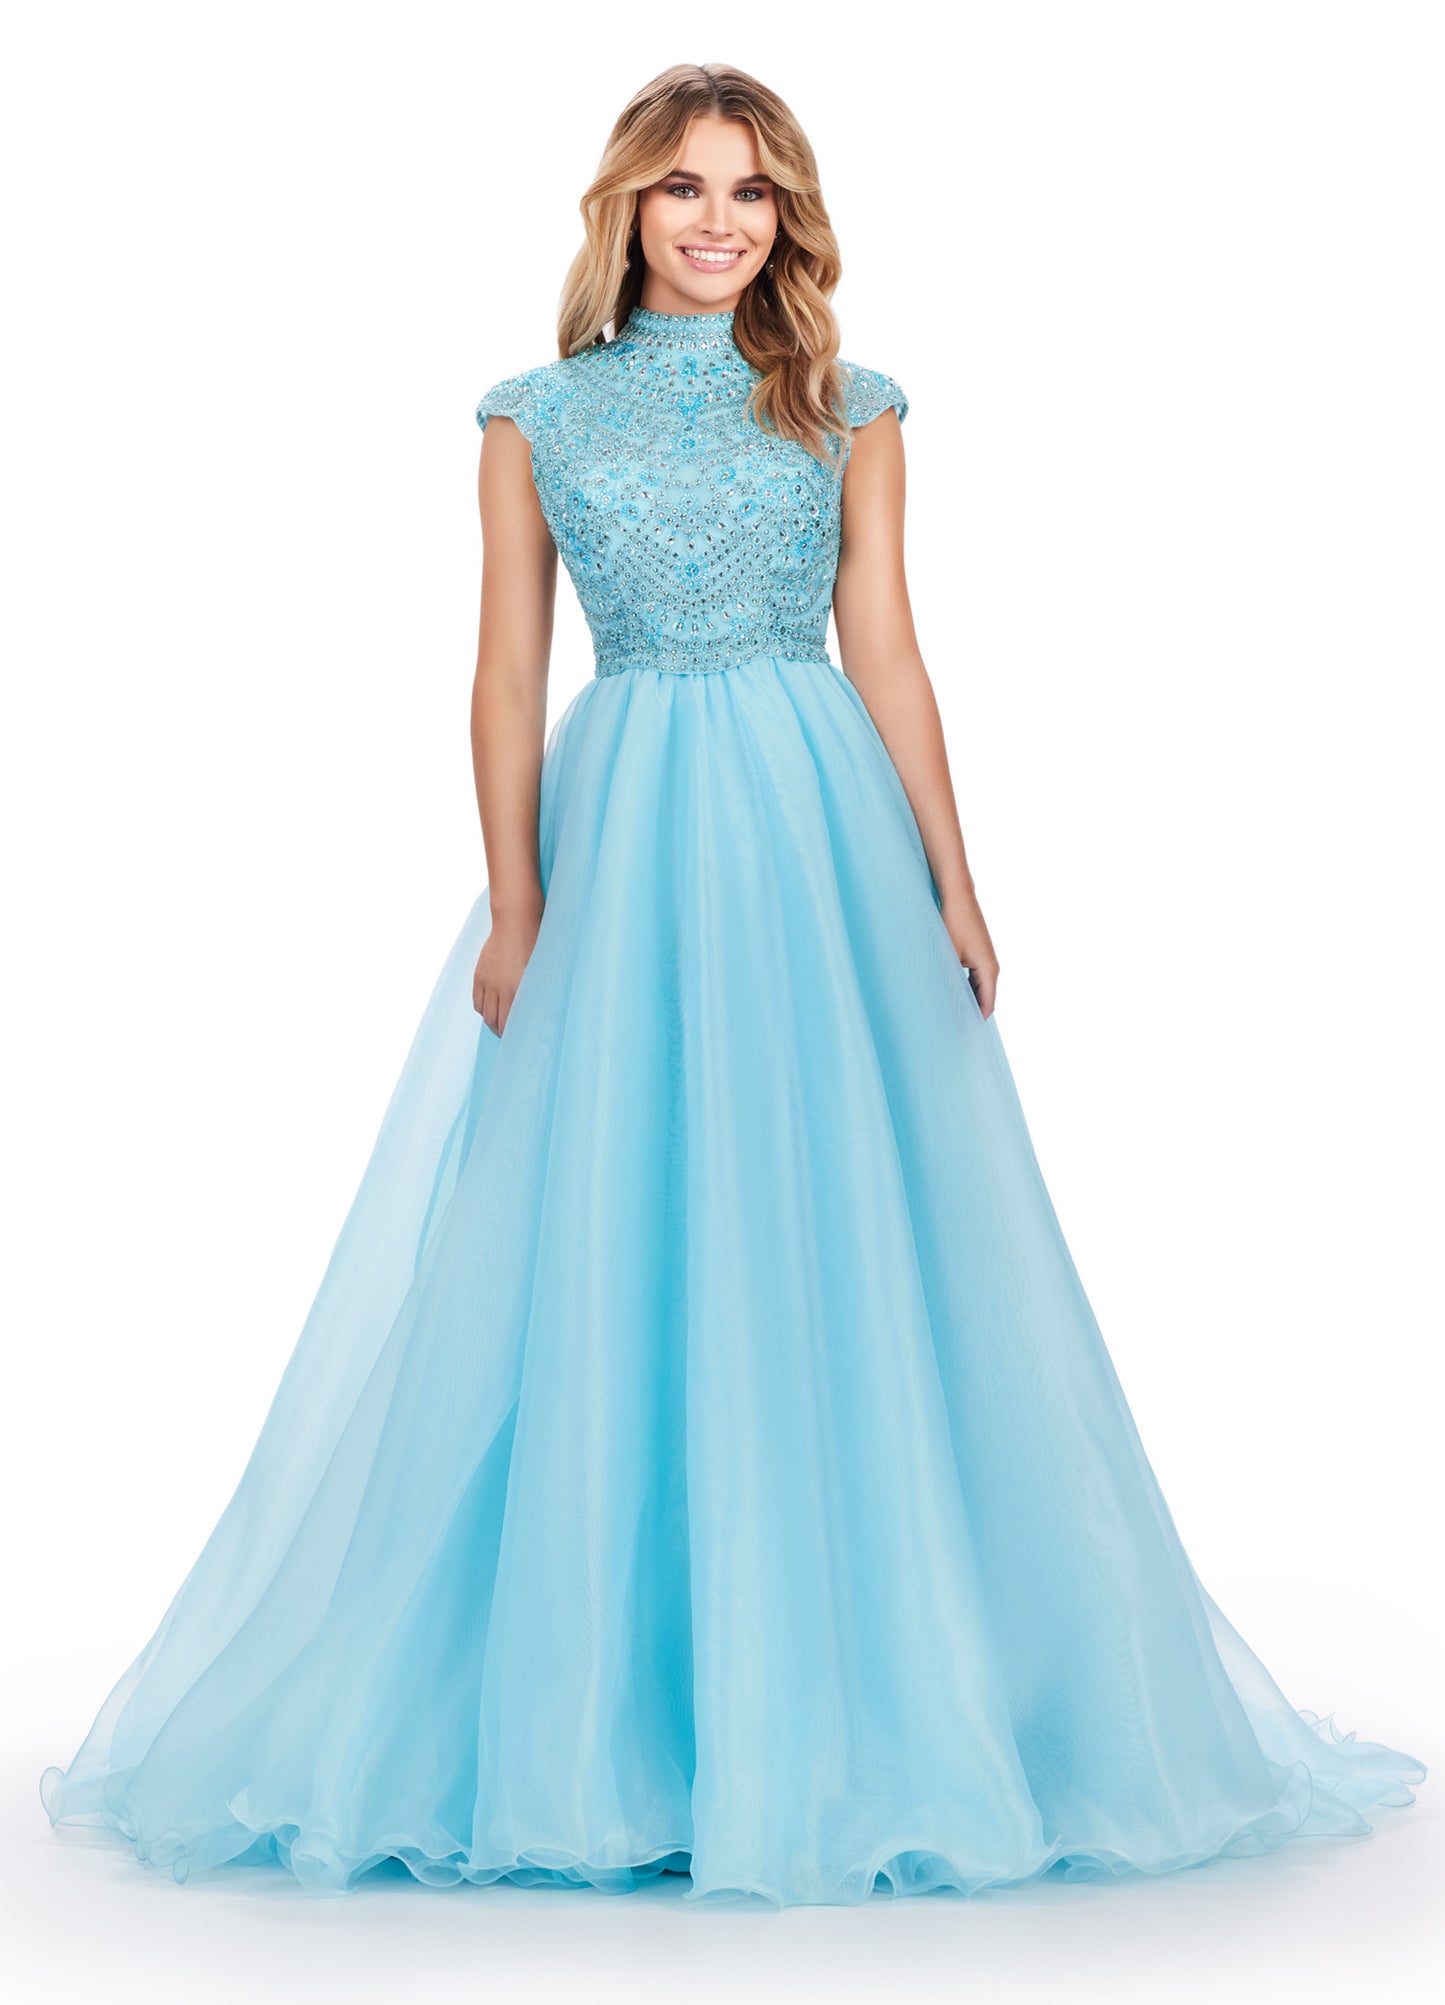 This Ashley Lauren 11630 Long Prom Dress is a stunning high neck organza ball gown with elegant cap sleeves. Perfect for formal events and pageants, this dress exudes sophistication and style. Made with quality materials, it offers both comfort and luxury for a truly special occasion. This organza ball gown features a fully beaded bodice with cap sleeves and a high neckline. The open back makes this dress extra fabulous!